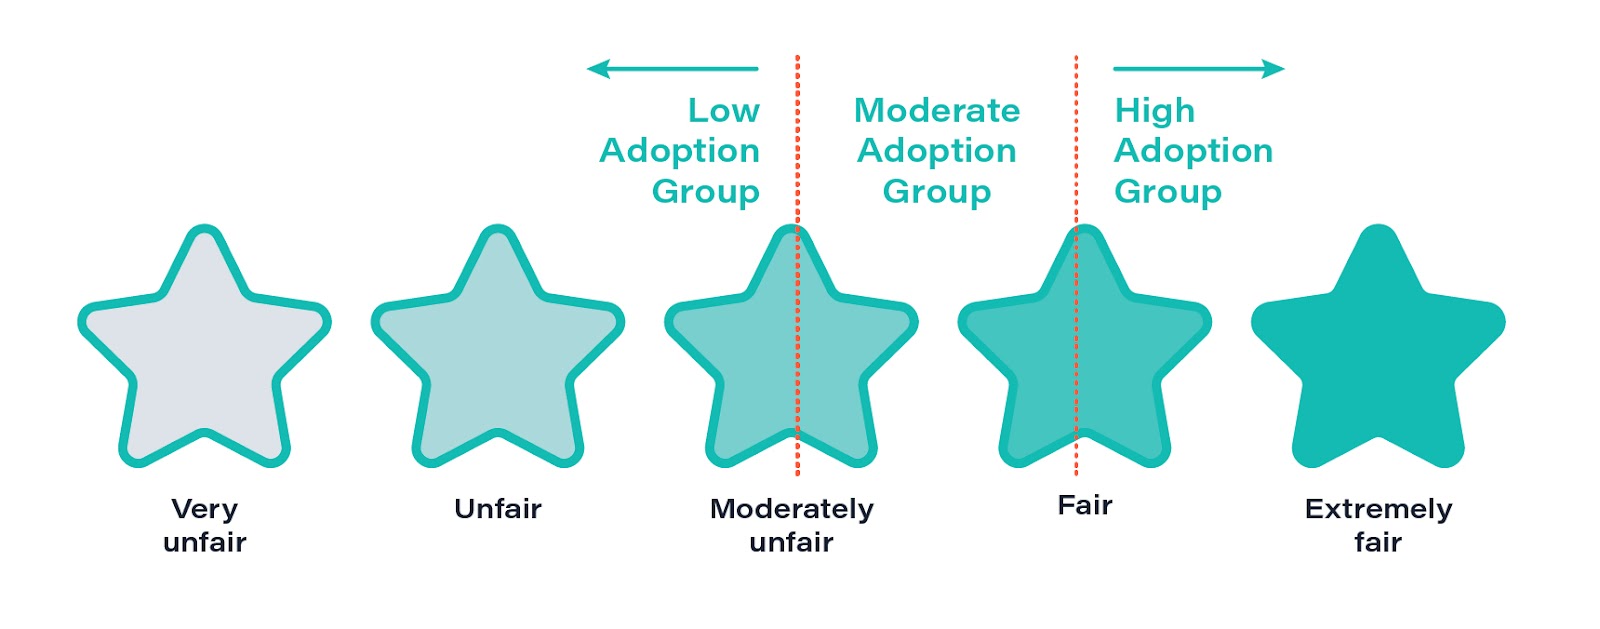 Marketers who work for companies that track the fewest ABM metrics rate the way they are evaluated as only "moderately fair," while those in companies with high adoption of ABM metrics rate their evaluations as "fair." Marketers who fall in the middle in terms of ABM adoption also fall in between the "moderately fair" and "fair" ratings for how they are evaluated.